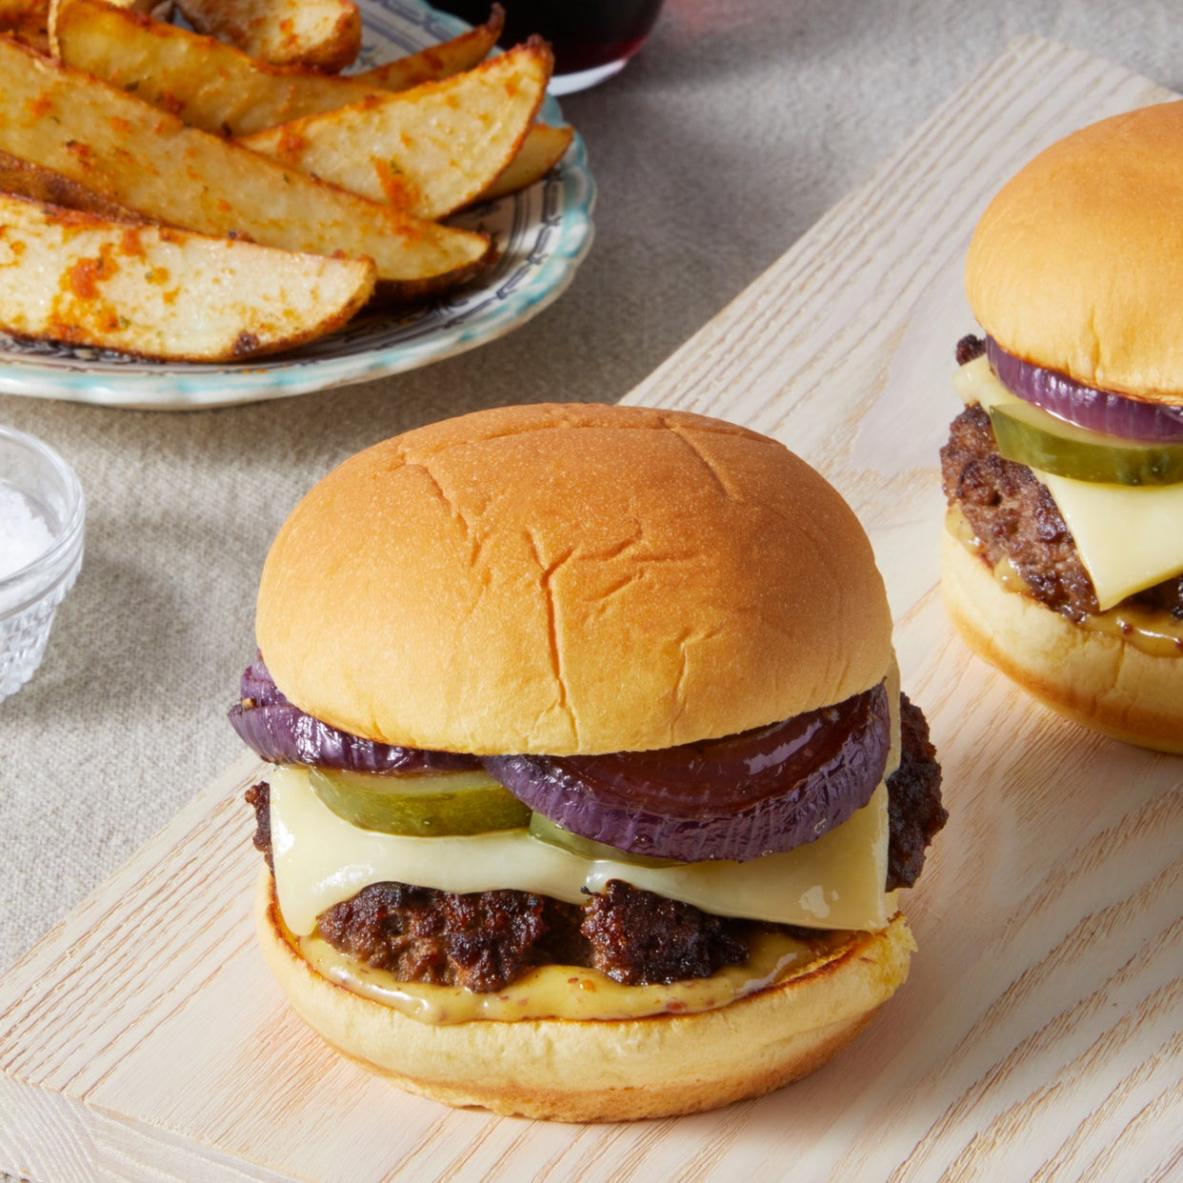 What Are Some of the Best Side Dishes to Serve with a Cheeseburger?